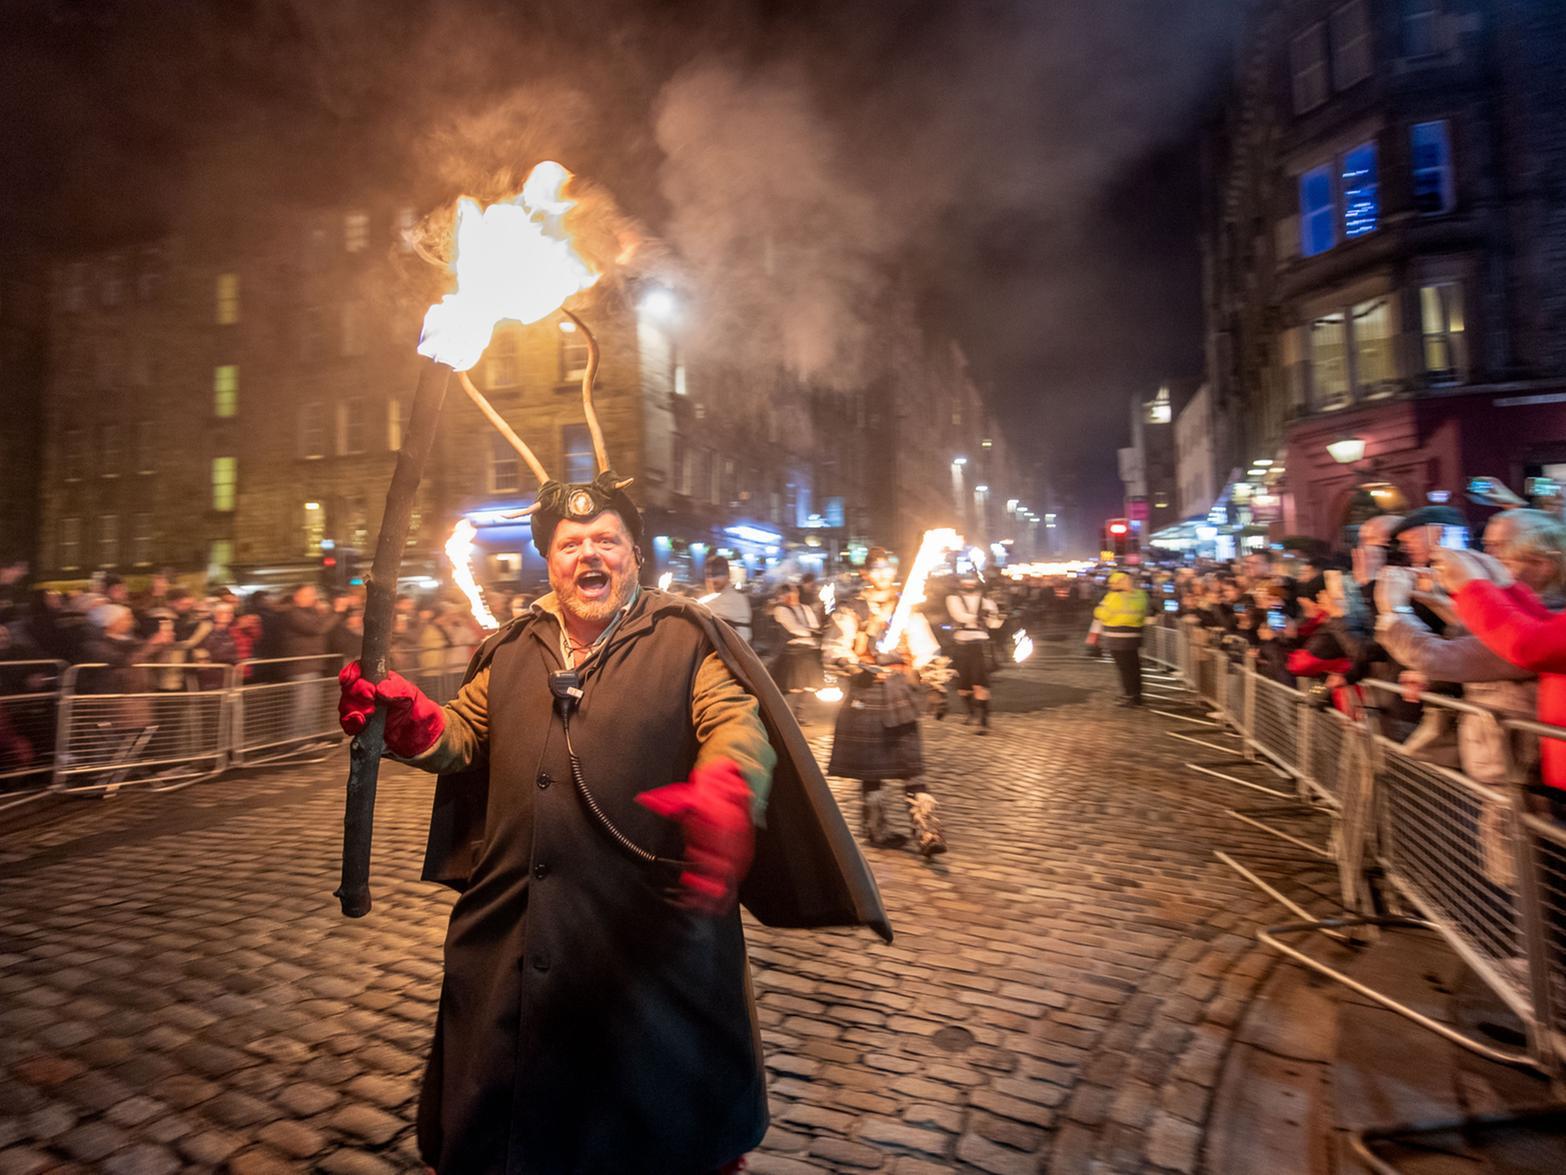 The sold-out Torchlight Procession, in partnership with VisitScotland, marks the start of the Hogmanay celebrations with all eyes on Edinburgh as the city welcomes visitors from around the world. Pic: Ian Georgeson